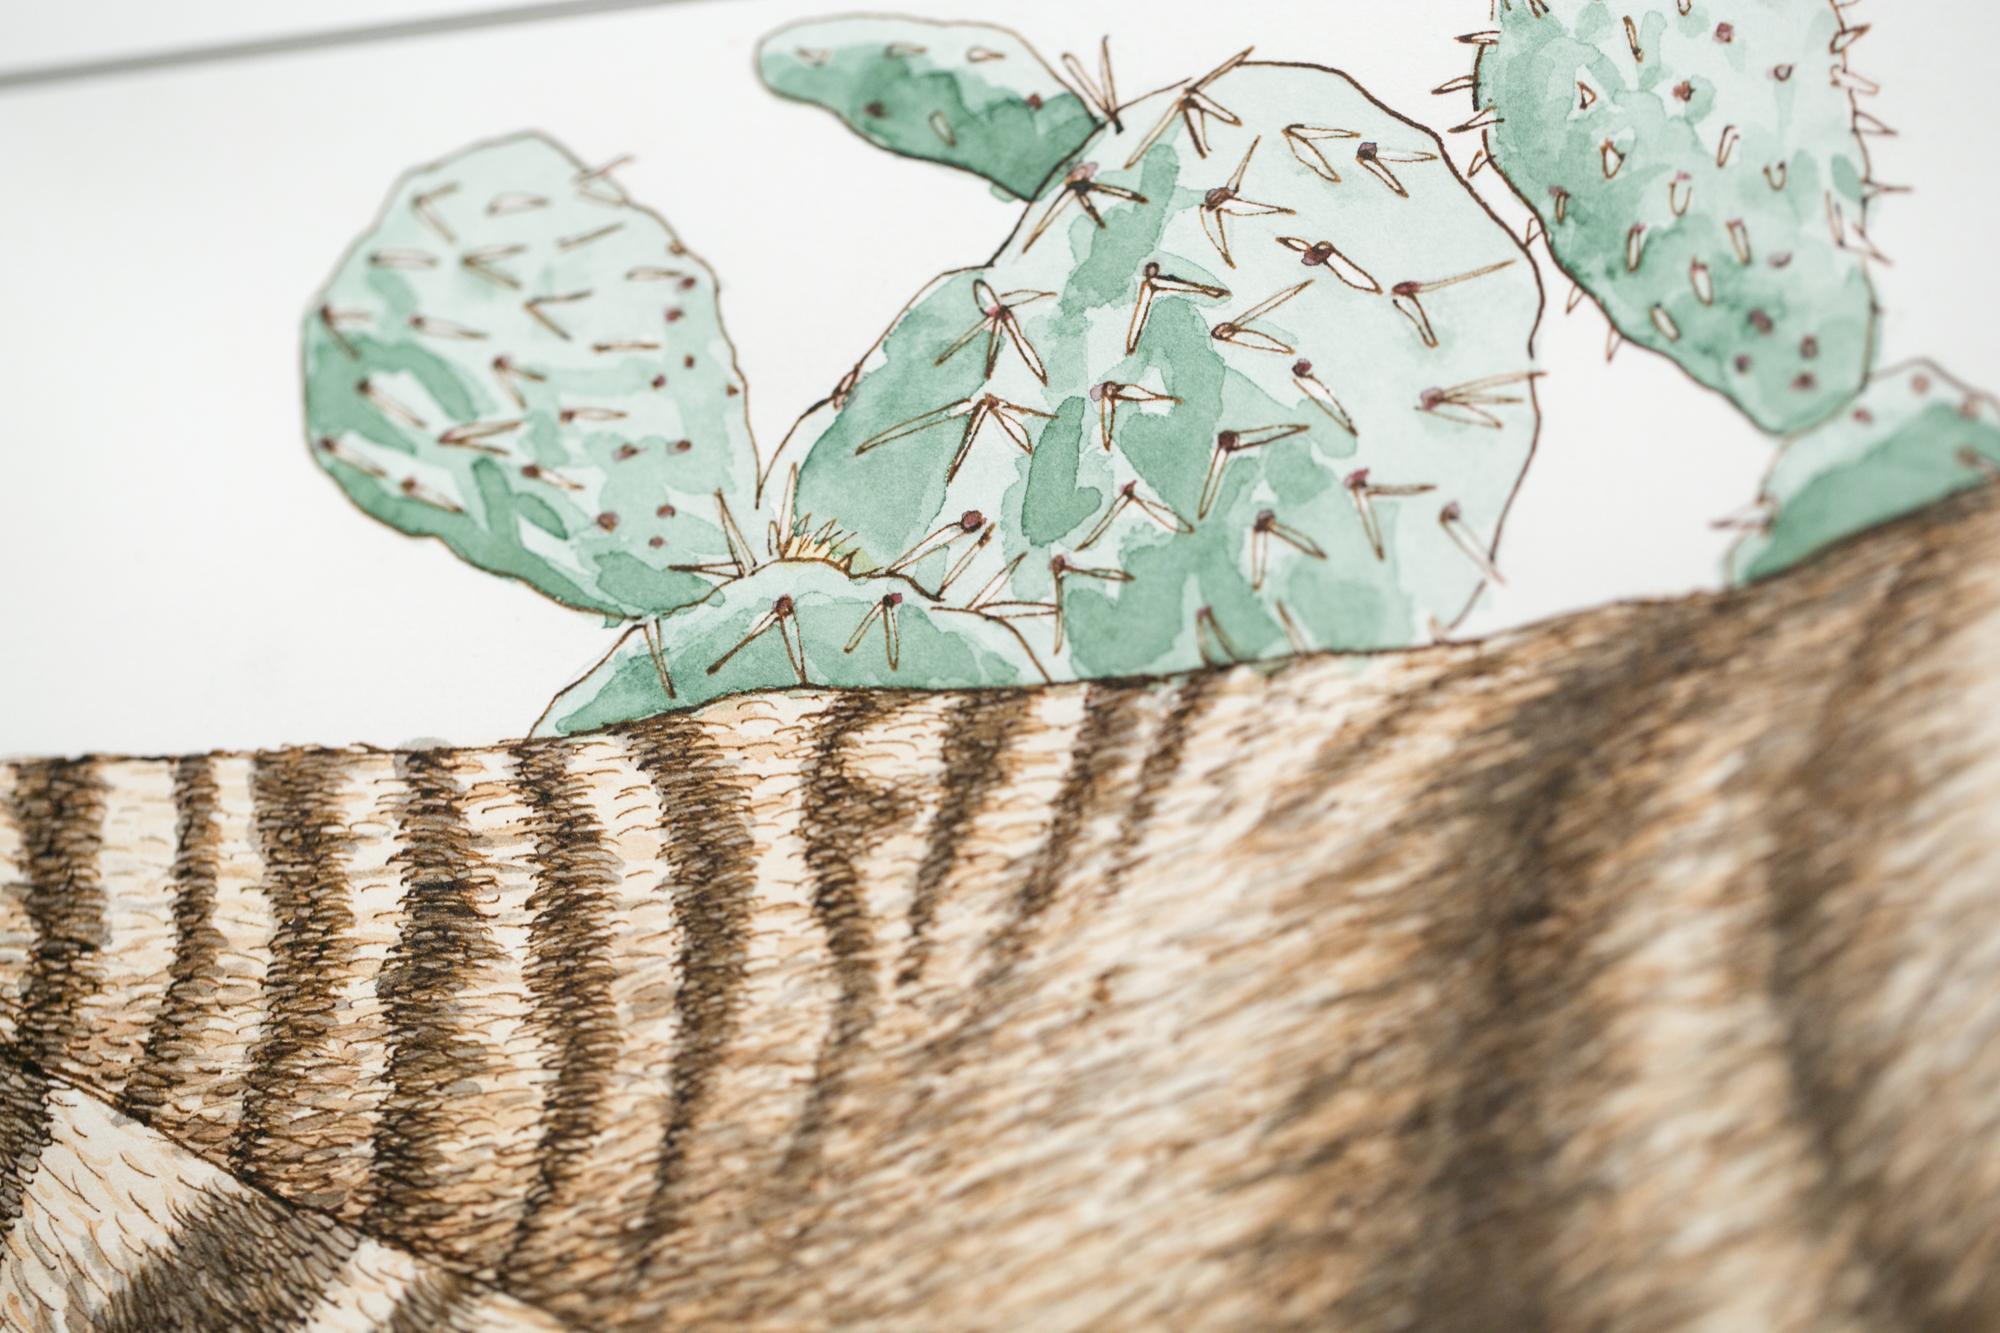 Thylacines with Prickly Pear Cacti - Brown Animal Art by Emily White